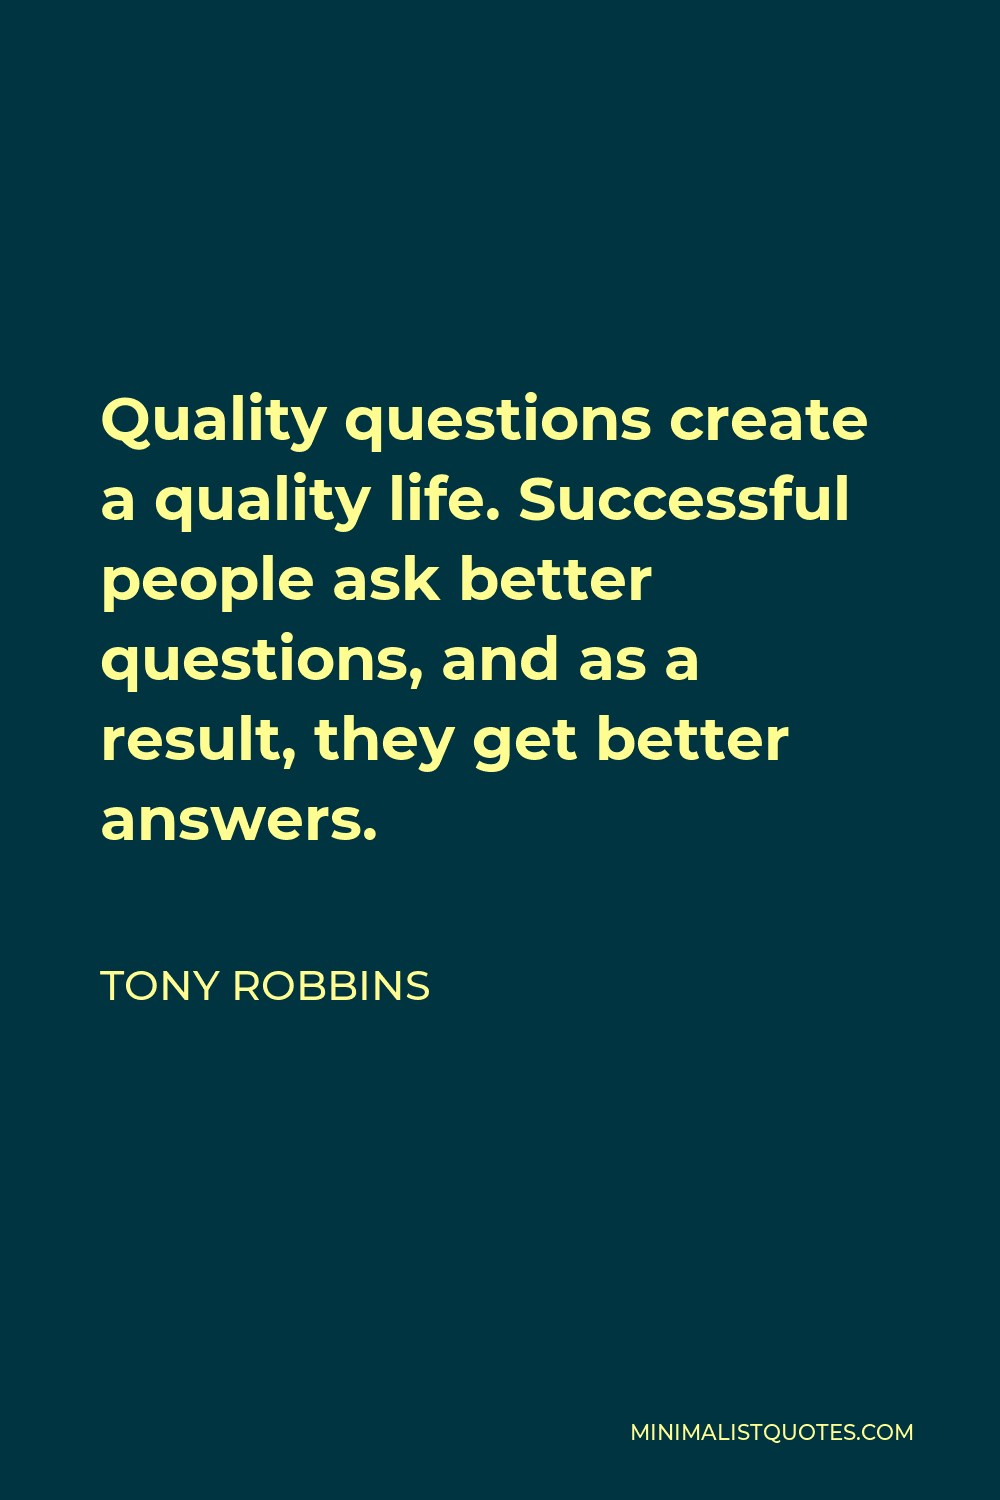 Tony Robbins Quote - Quality questions create a quality life. Successful people ask better questions, and as a result, they get better answers.